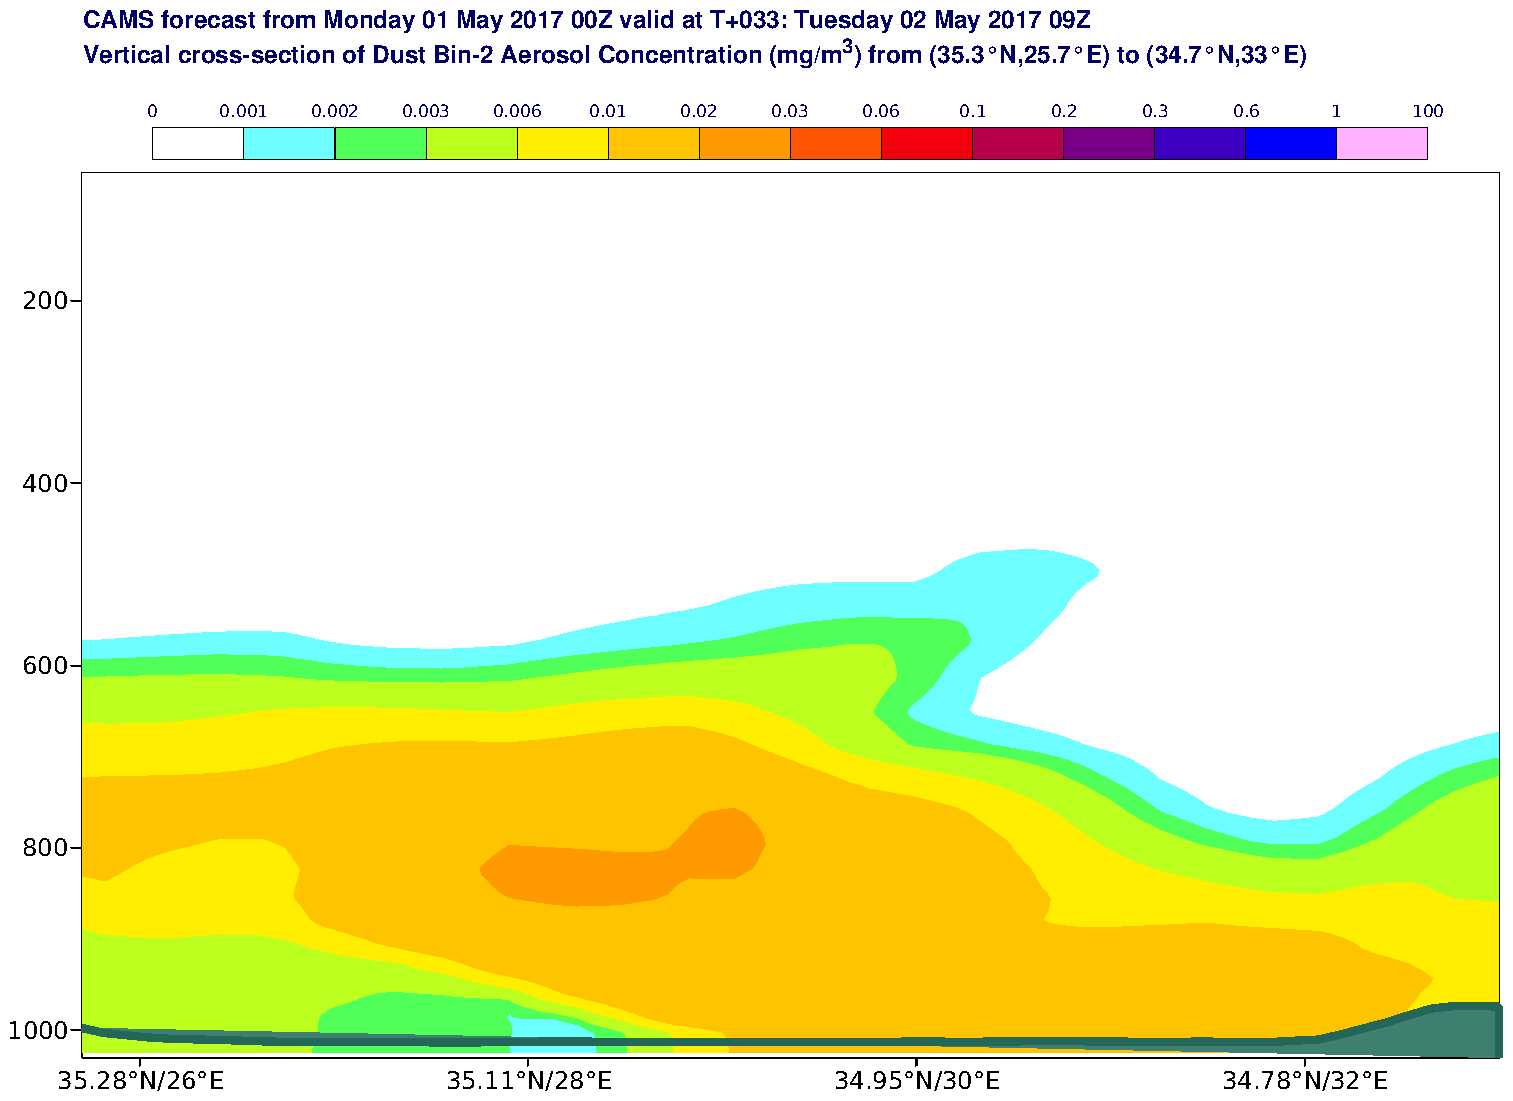 Vertical cross-section of Dust Bin-2 Aerosol Concentration (mg/m3) valid at T33 - 2017-05-02 09:00